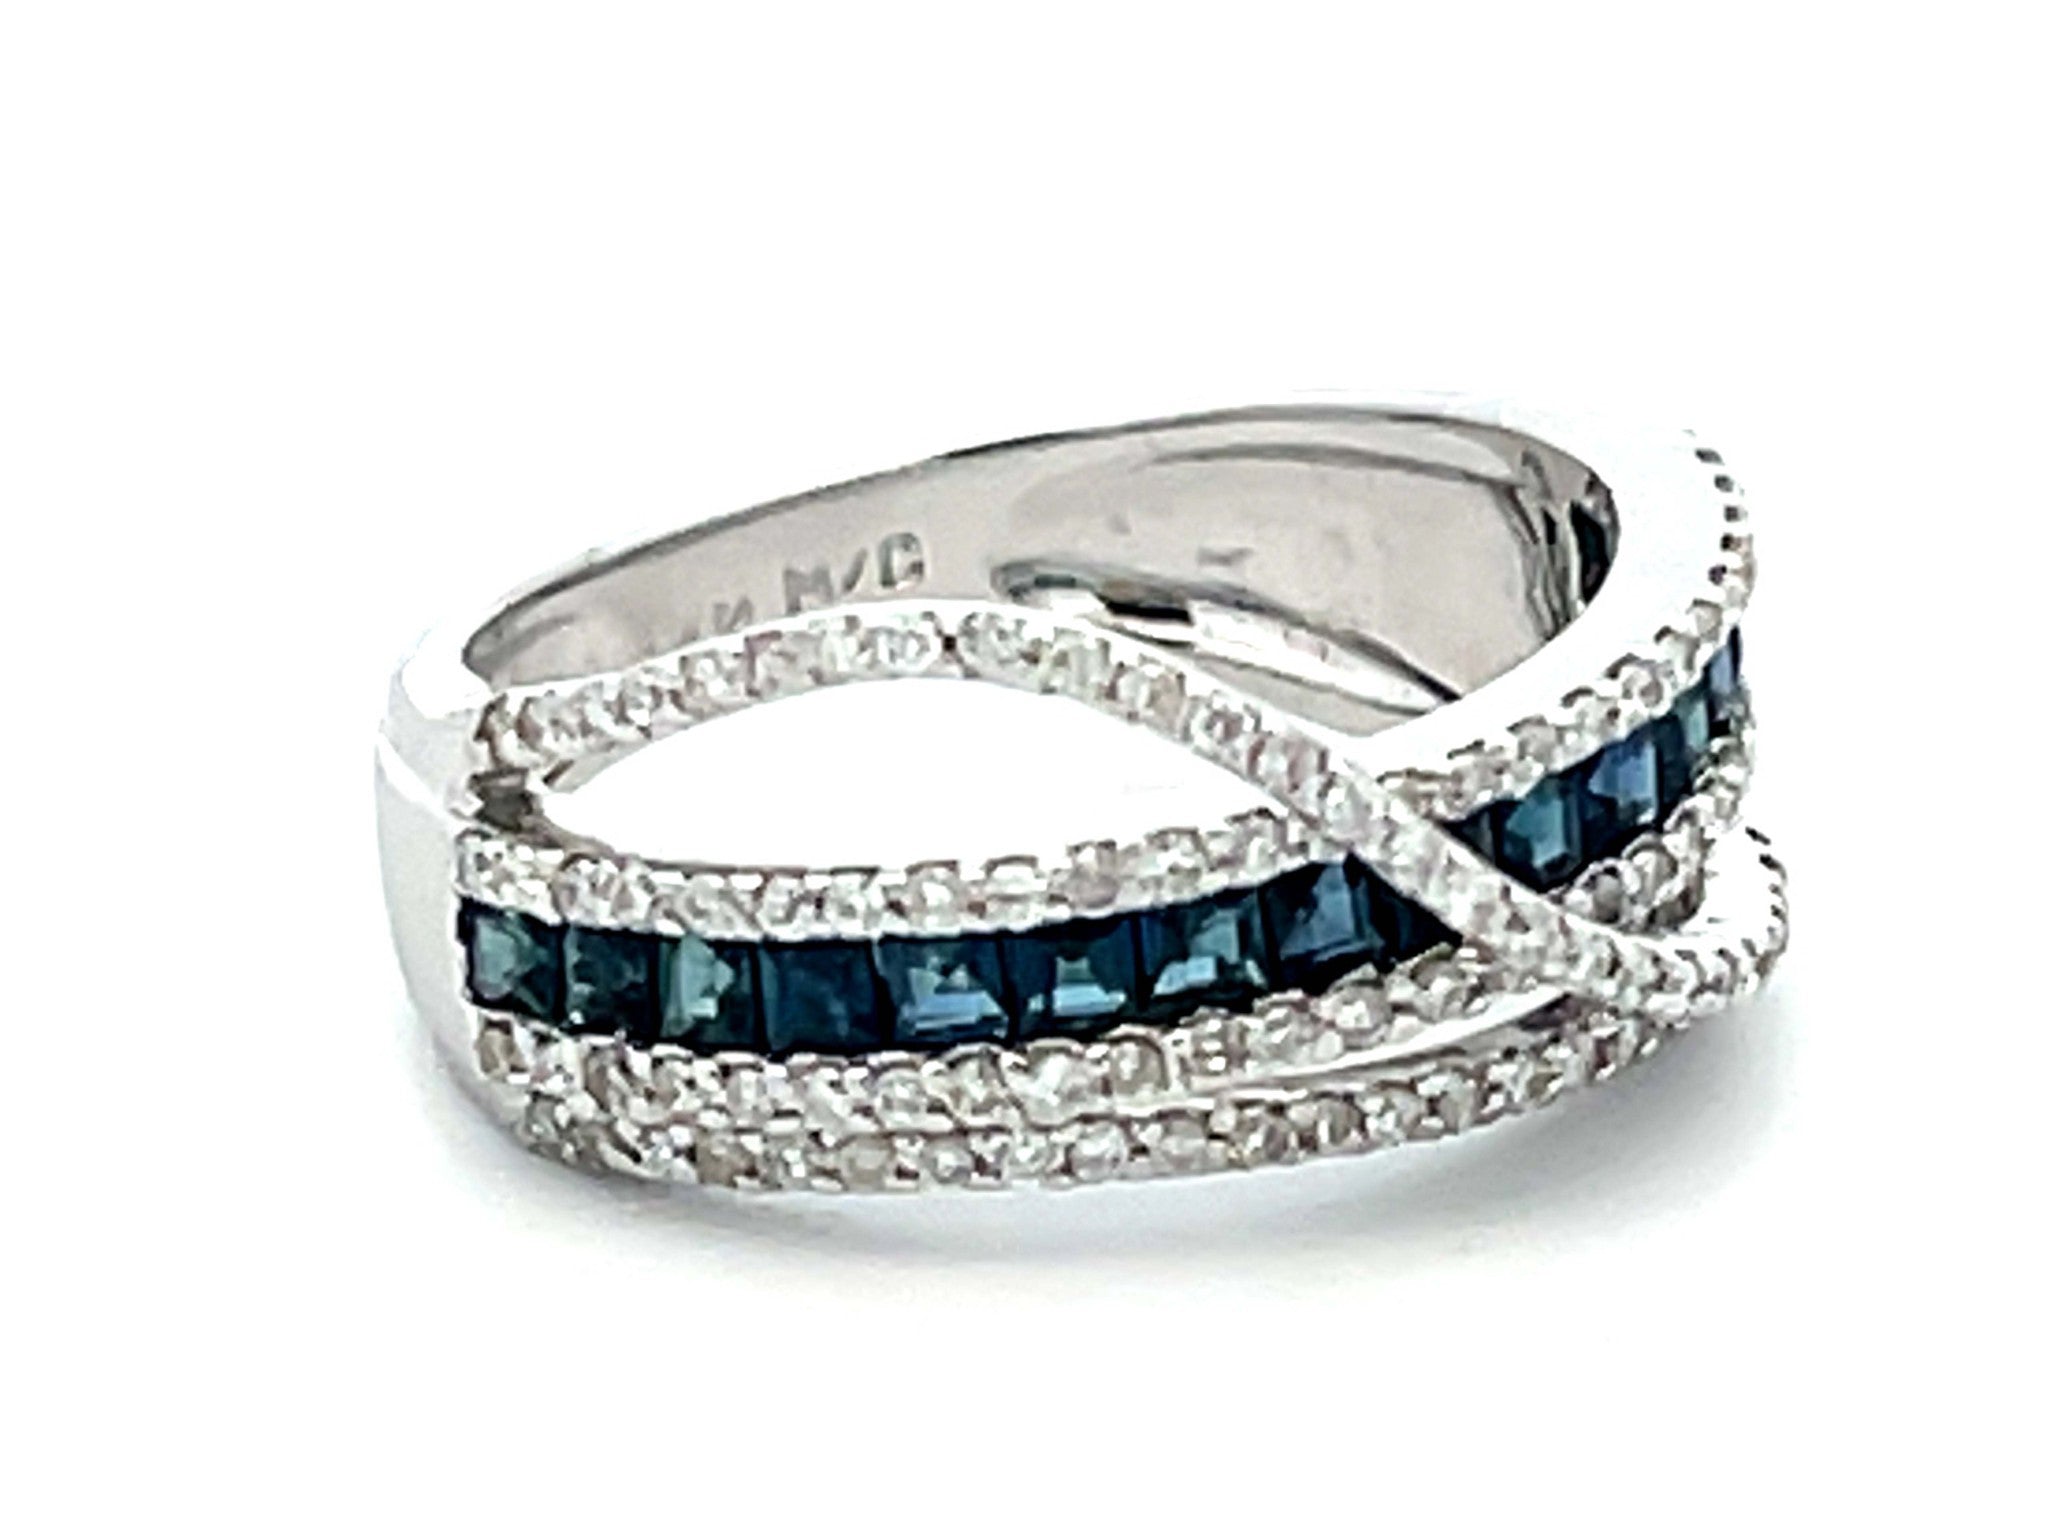 Diamond and Sapphire Ring in 14k White Gold